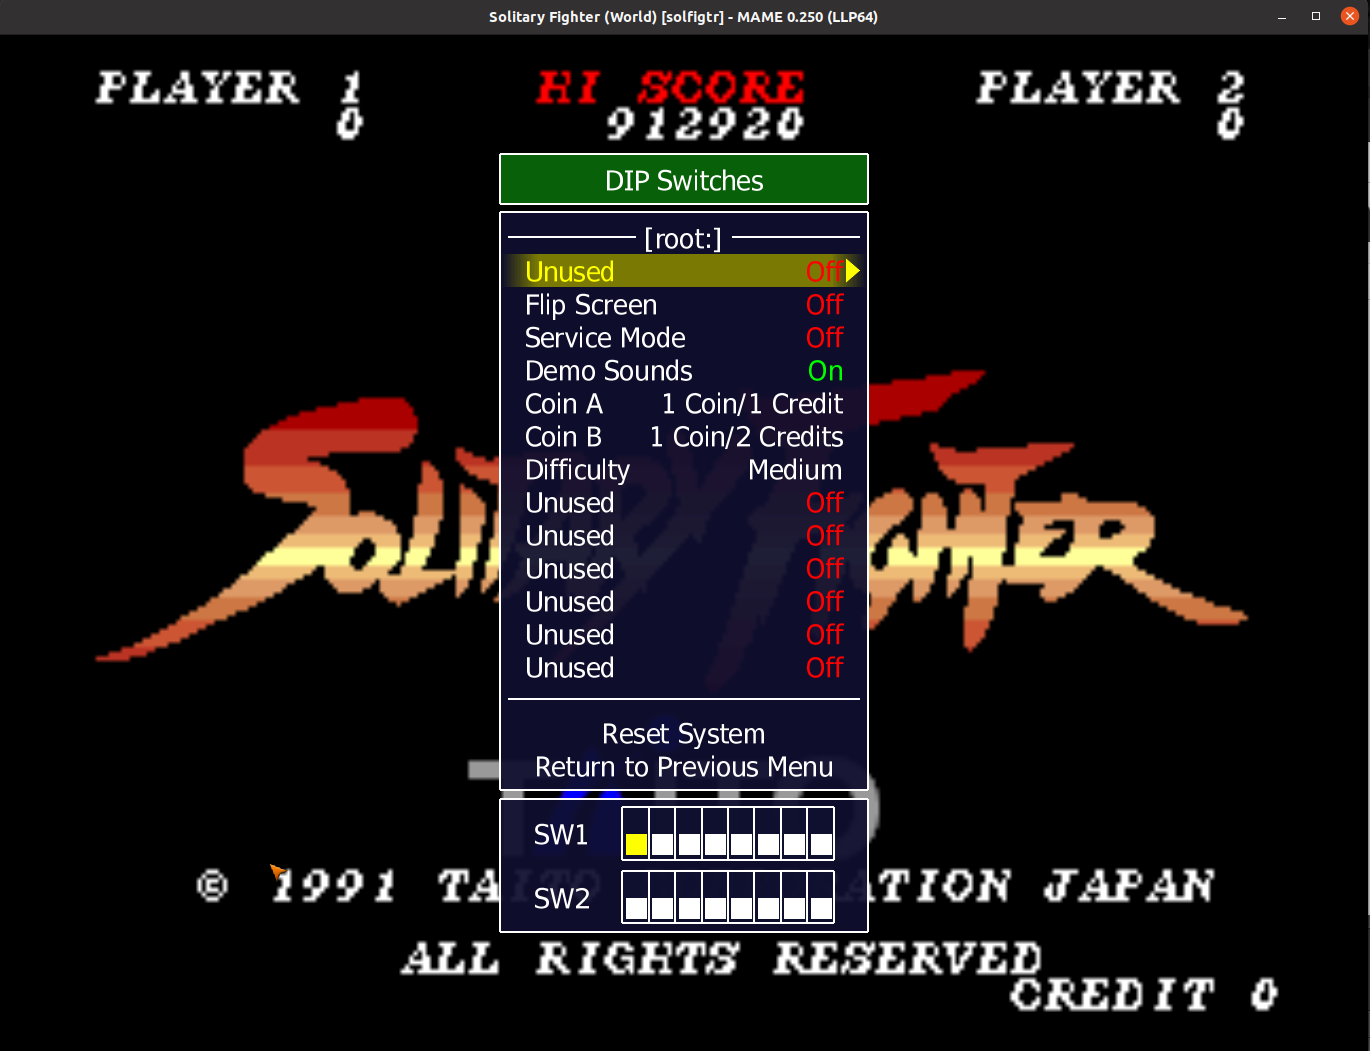 Solitary Fighter (World) (solfigtr) default settings, MAME 0.250